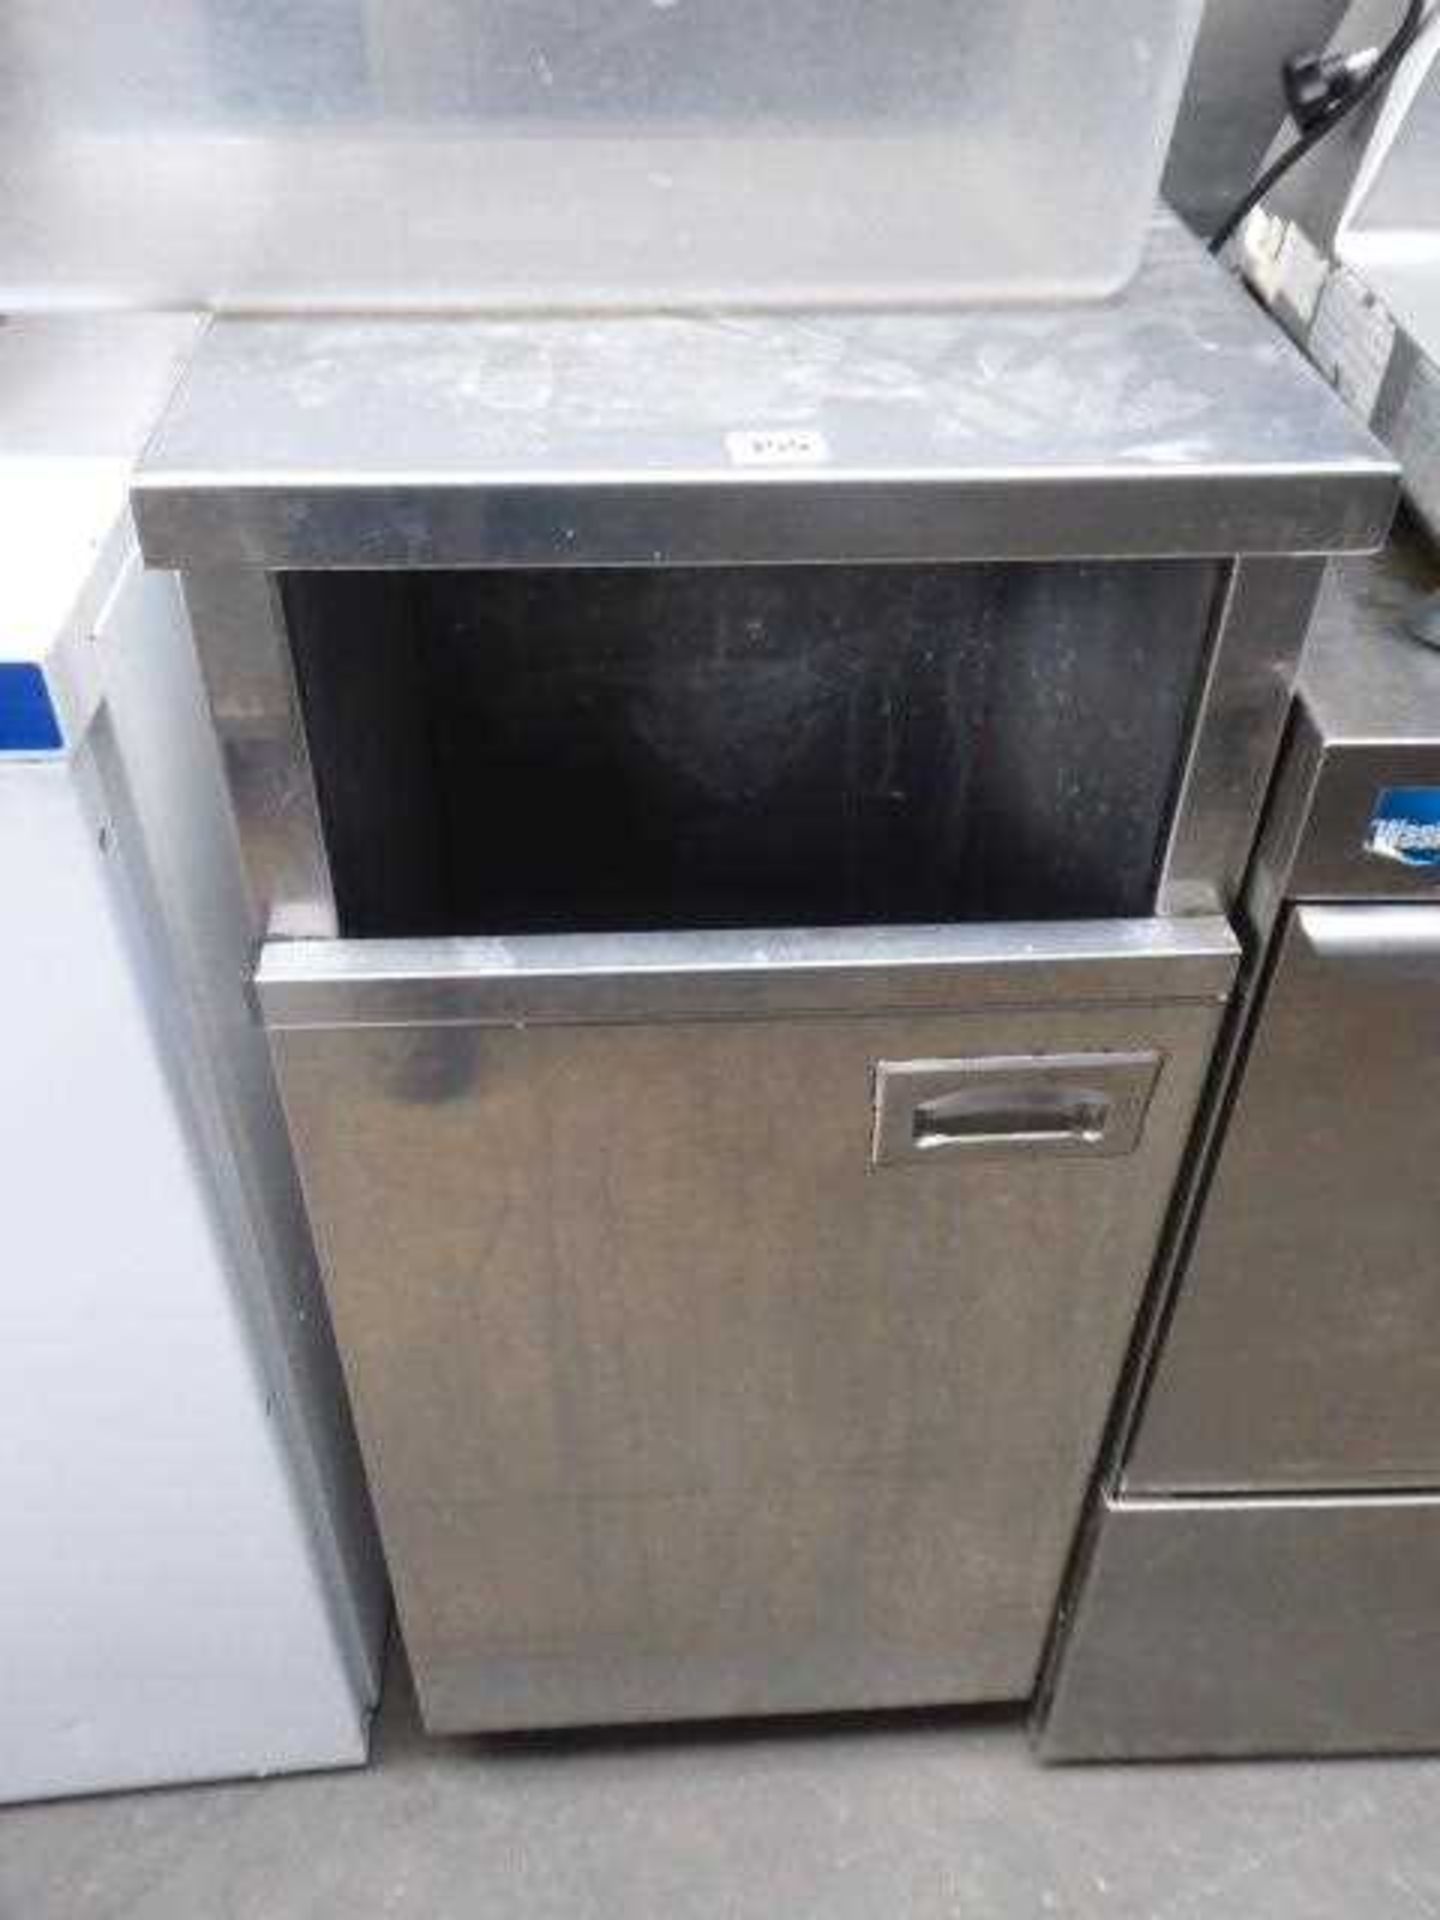 40cm stainless steel waste unit